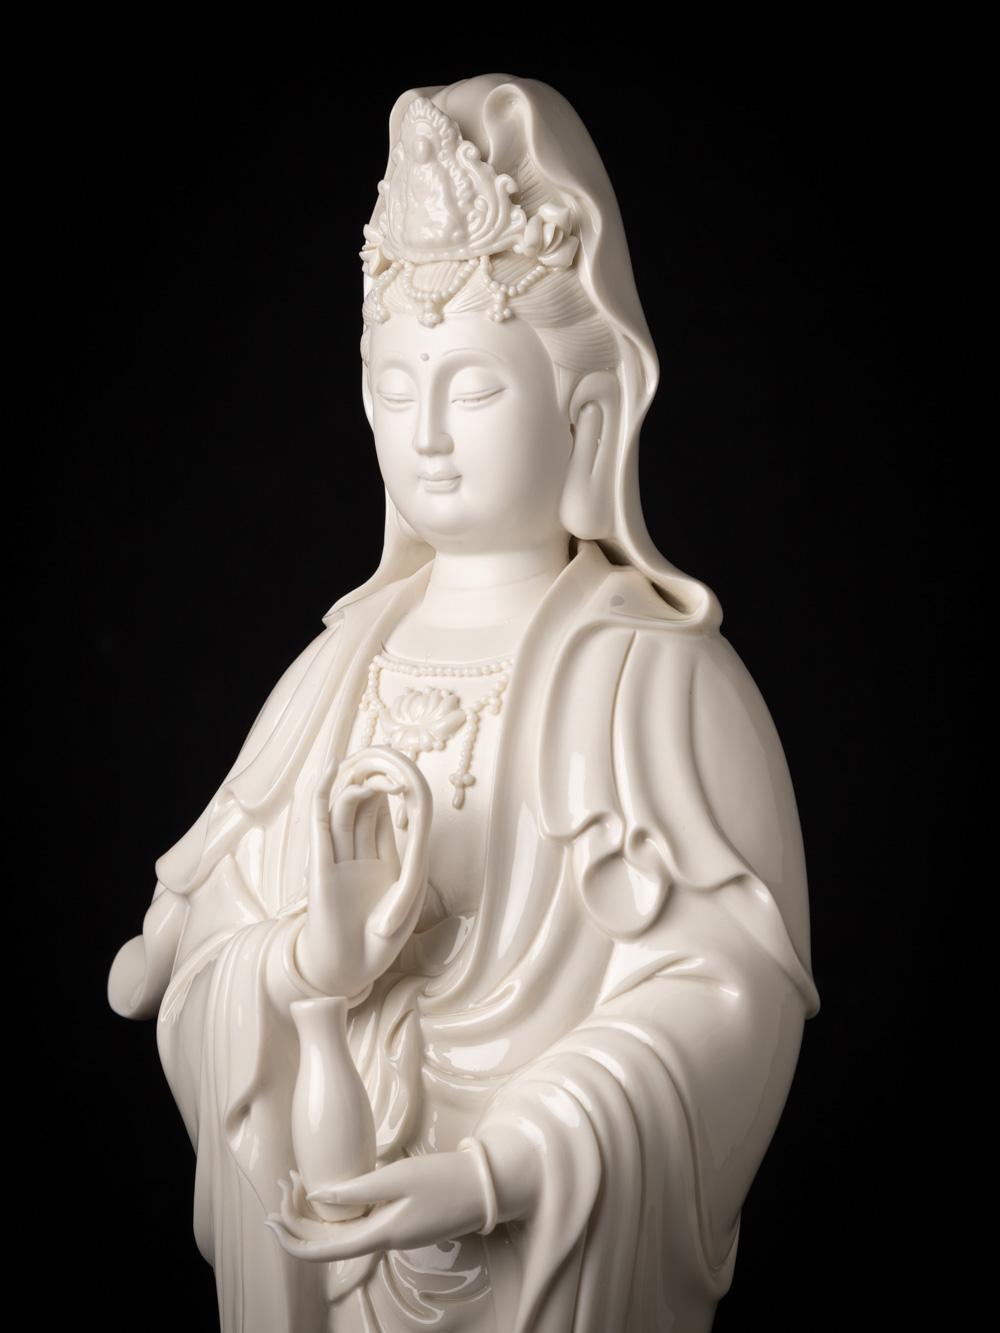 Beautiful and detailed porcelain Guan Yin statue originated from China 3